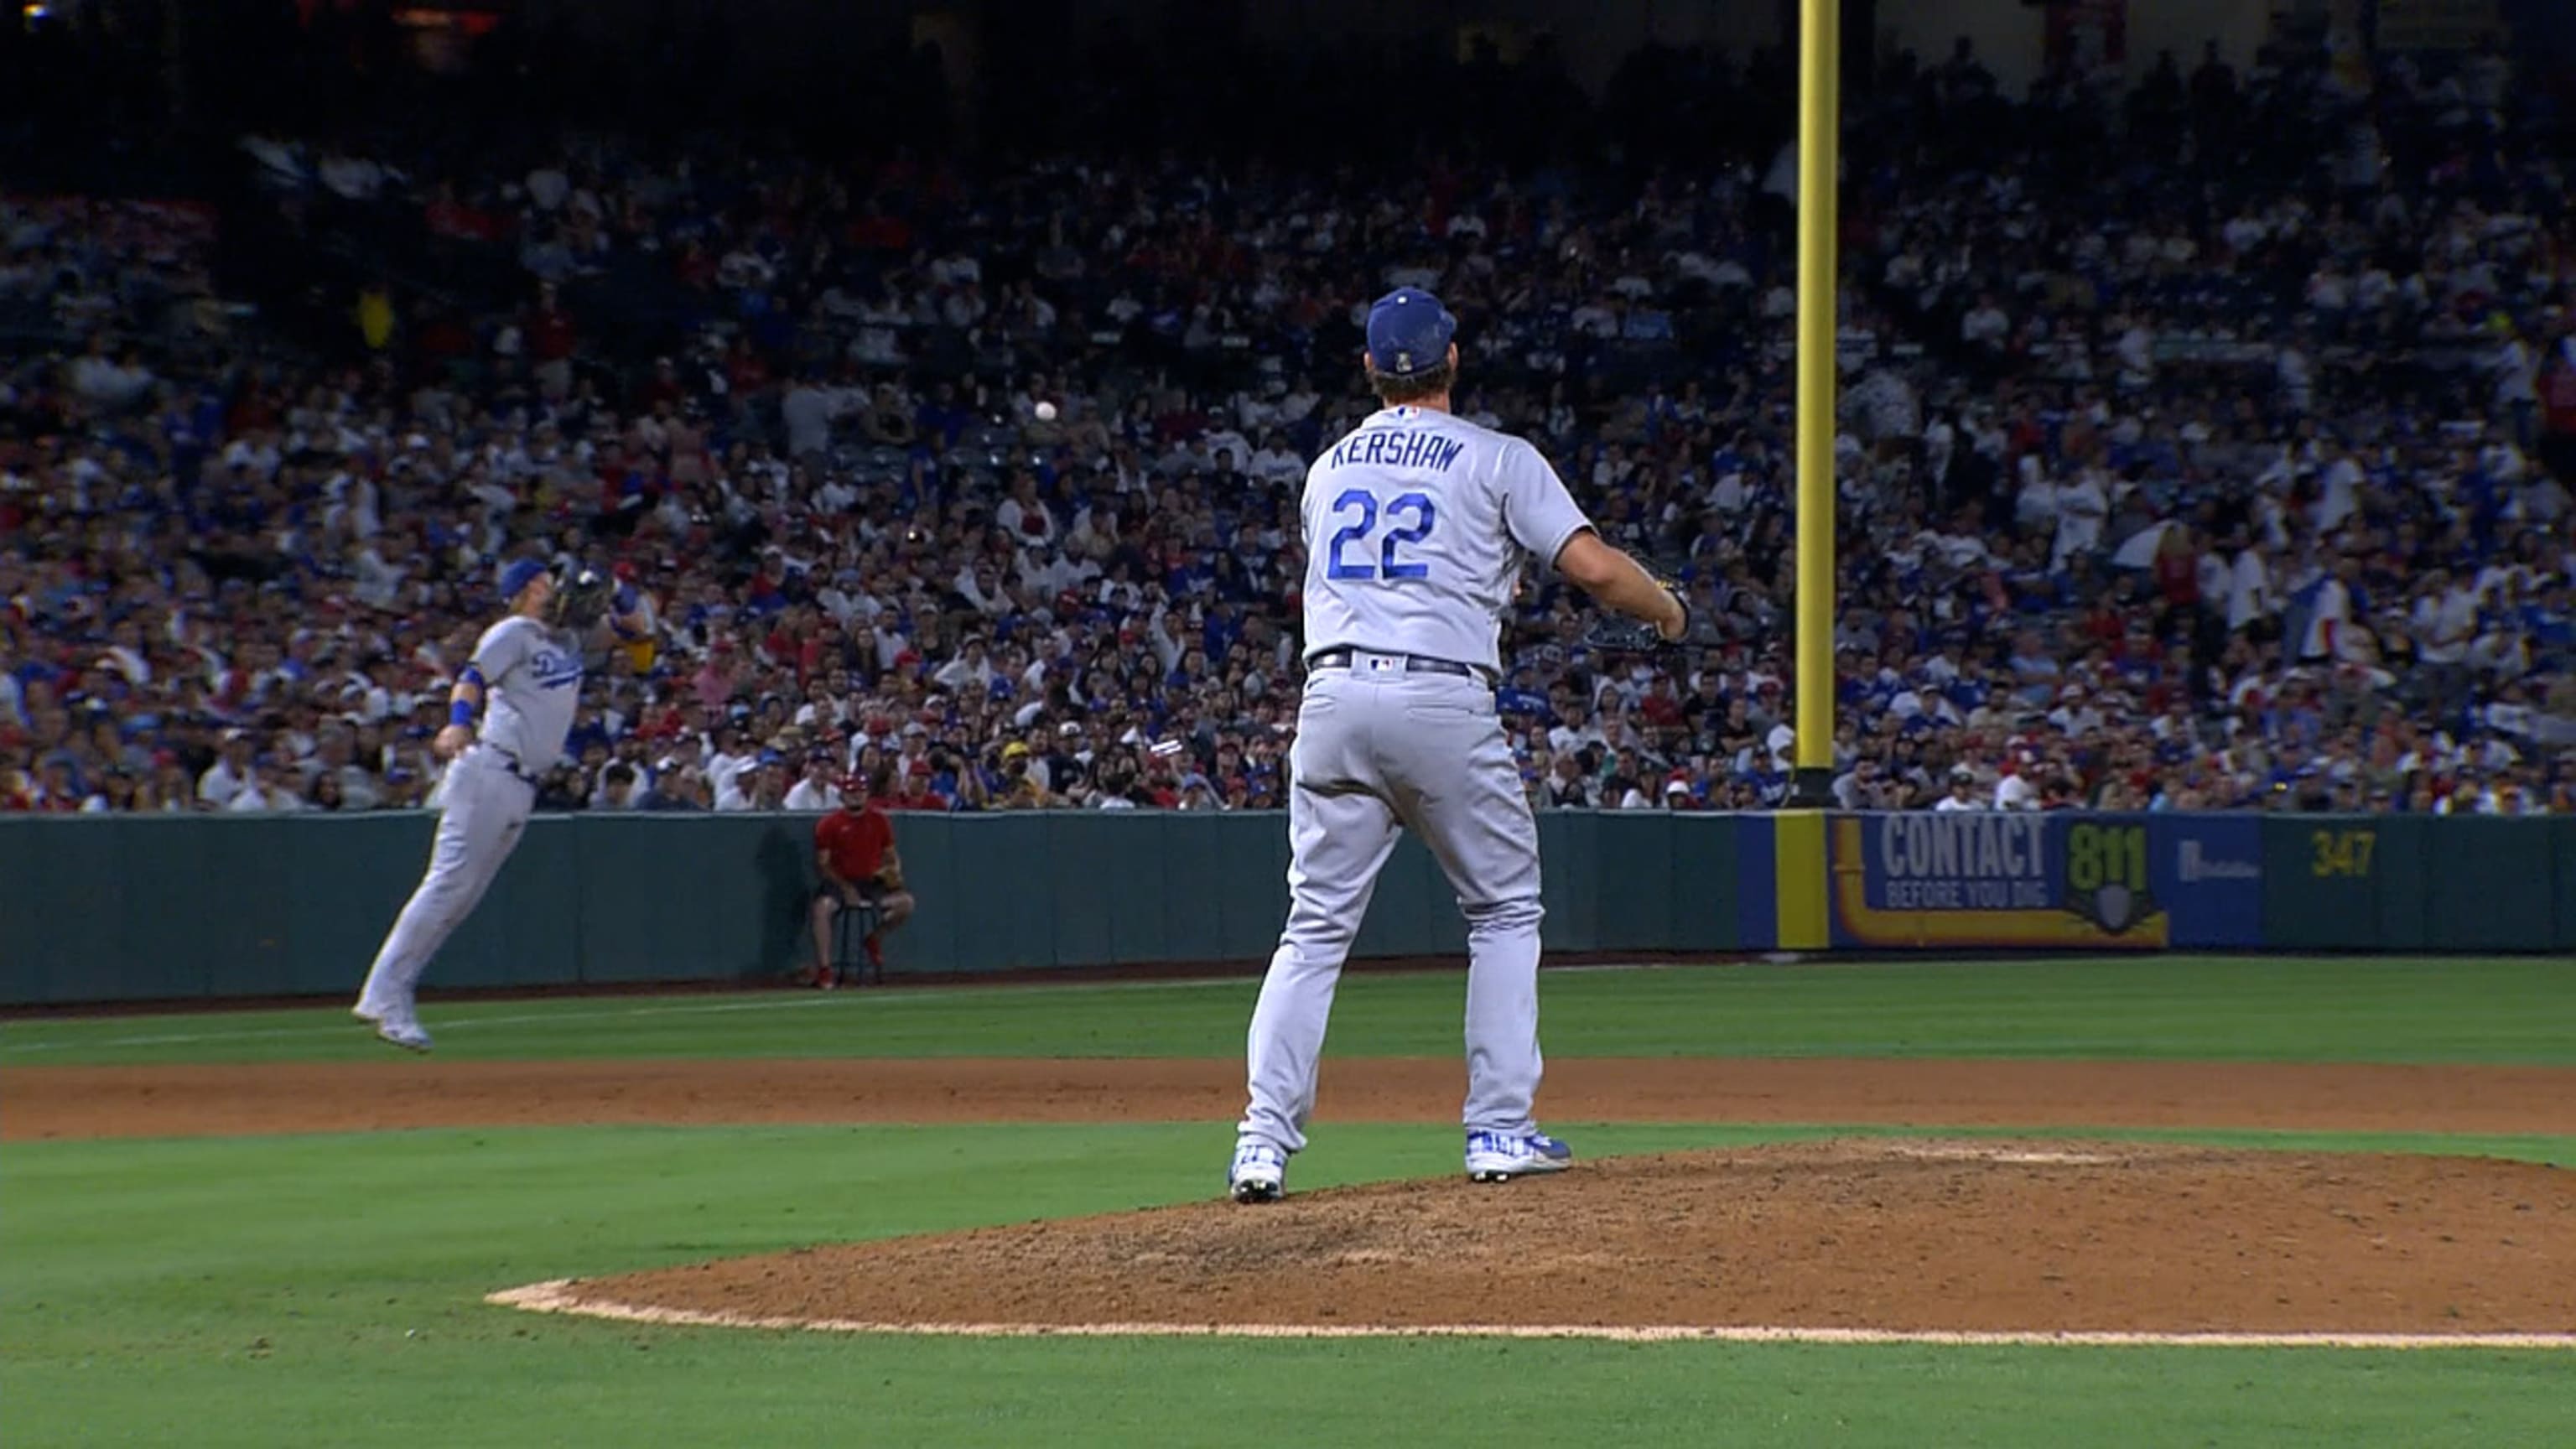 Dodgers' Kershaw loses perfect game in 8th inning vs Angels